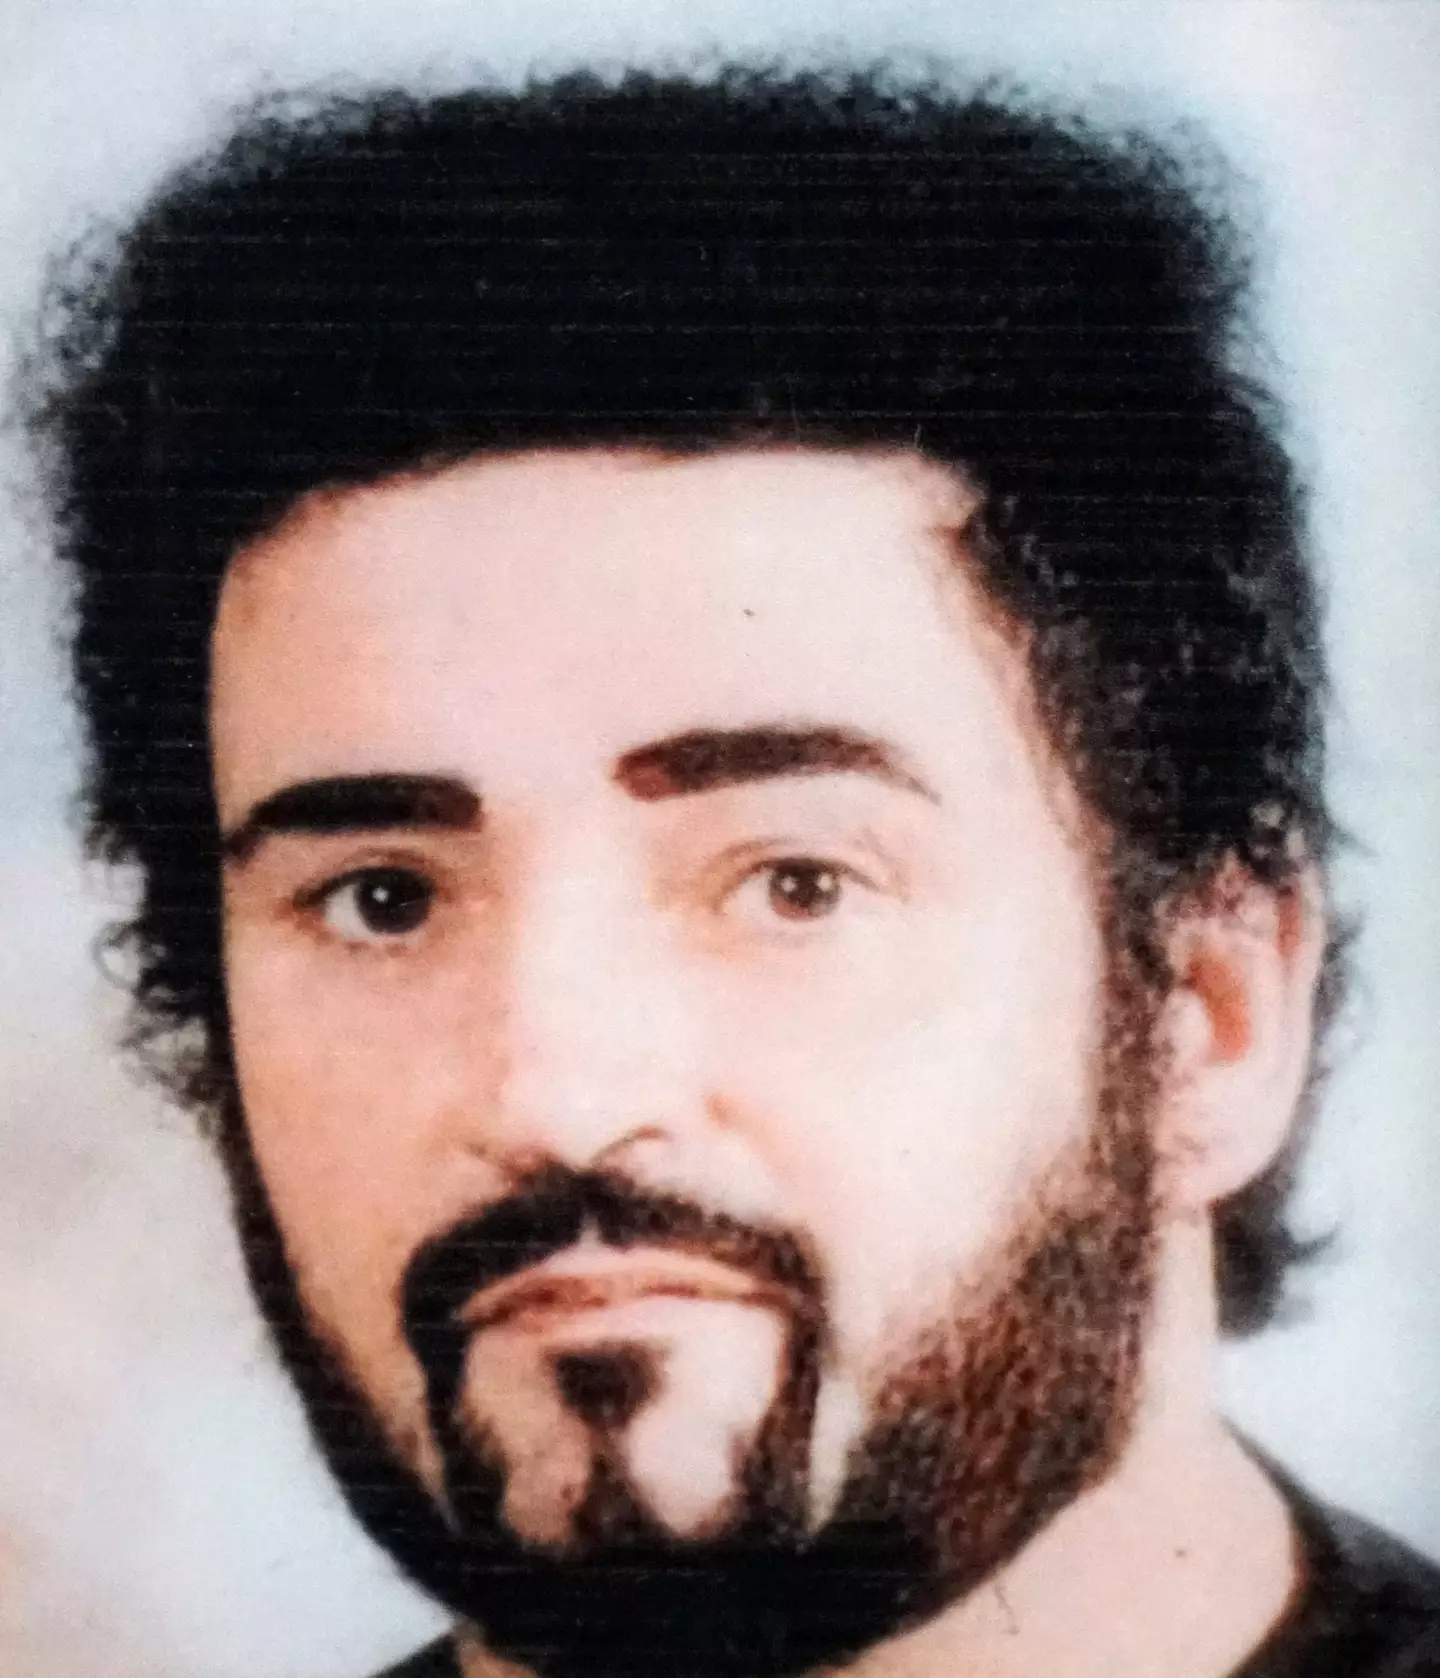 The Long Shadow will focus on how Peter Sutcliffe was captured.